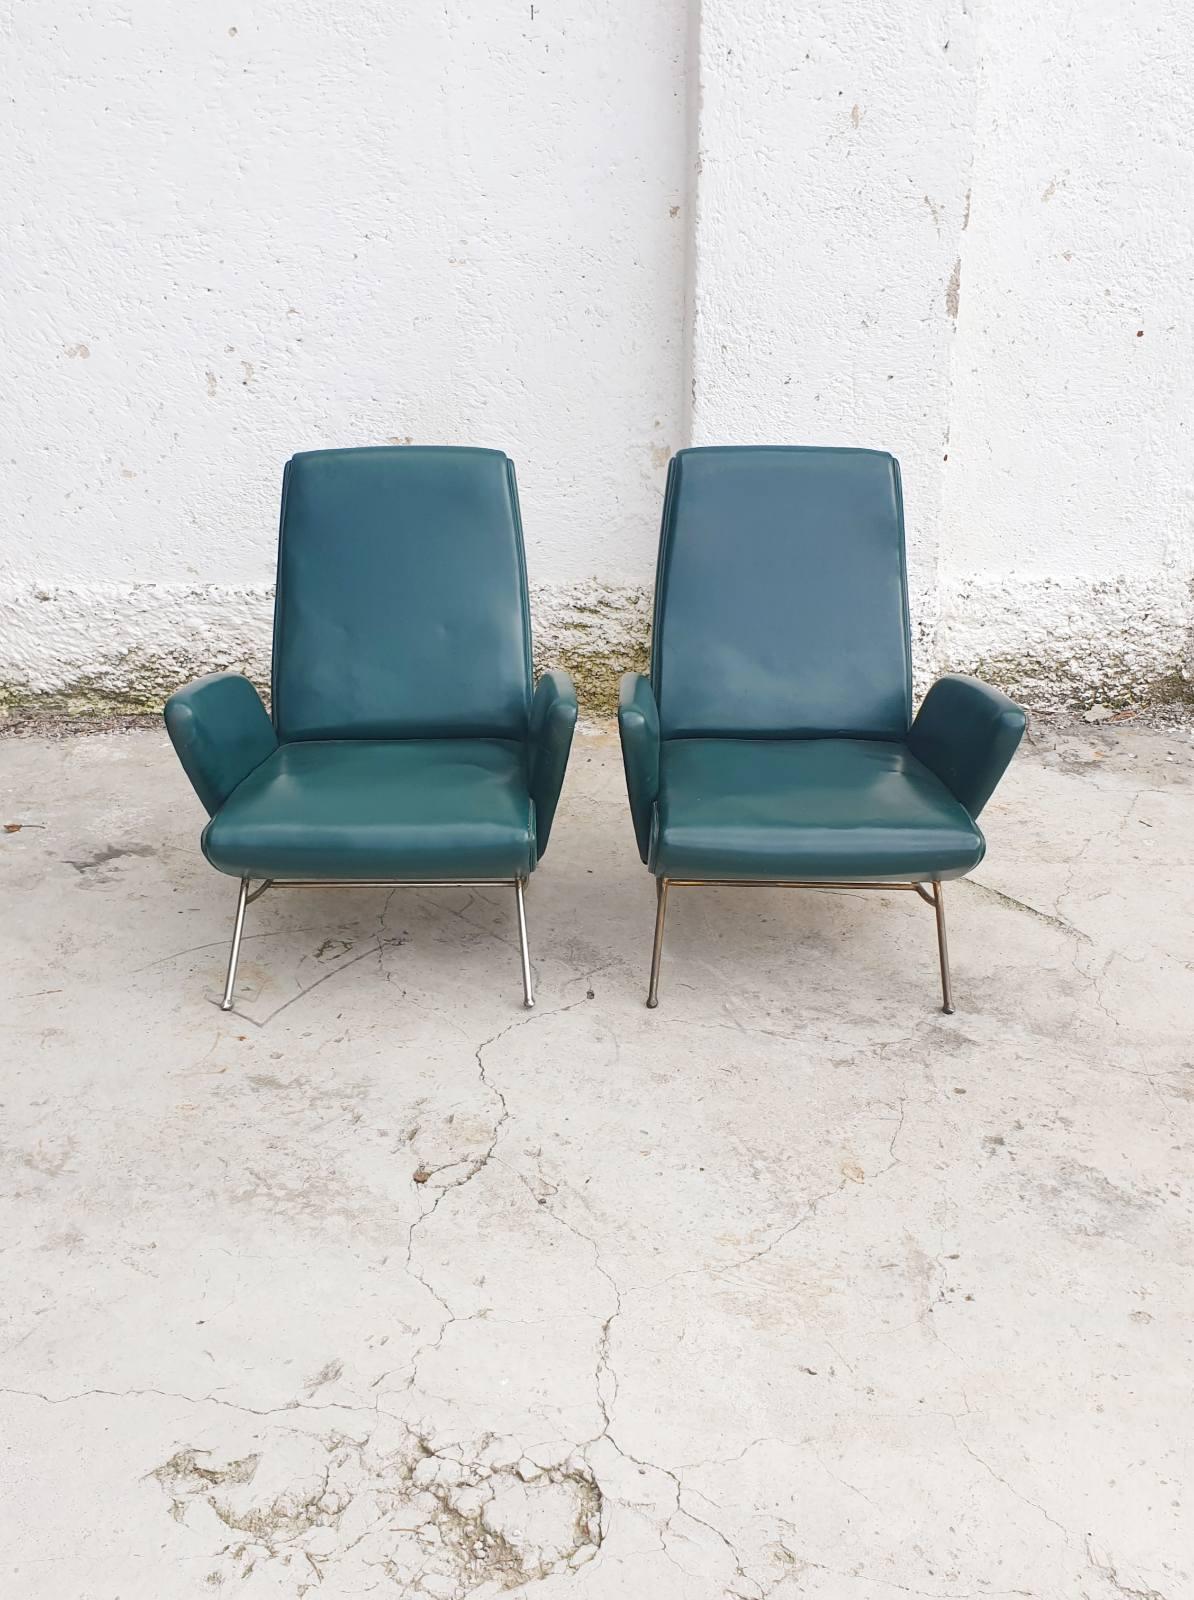 Very rary pair of lounge armchairs designed by Nino Zoncada in the 50s

Green faux leather

Perfect condition